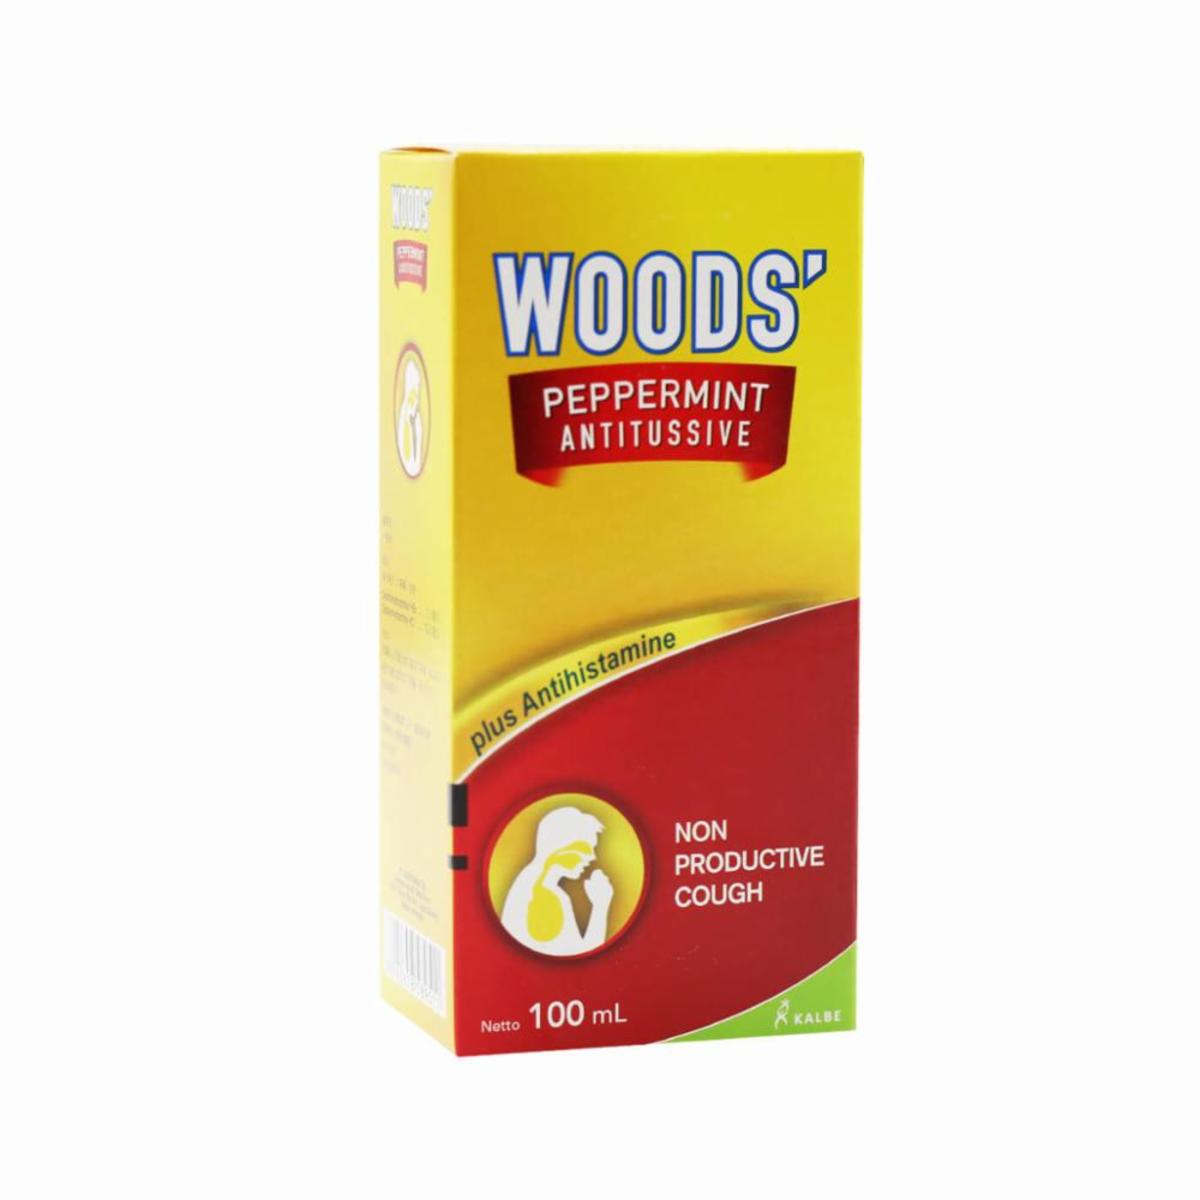 Woods' Cough Syrup Antitussive 100ml